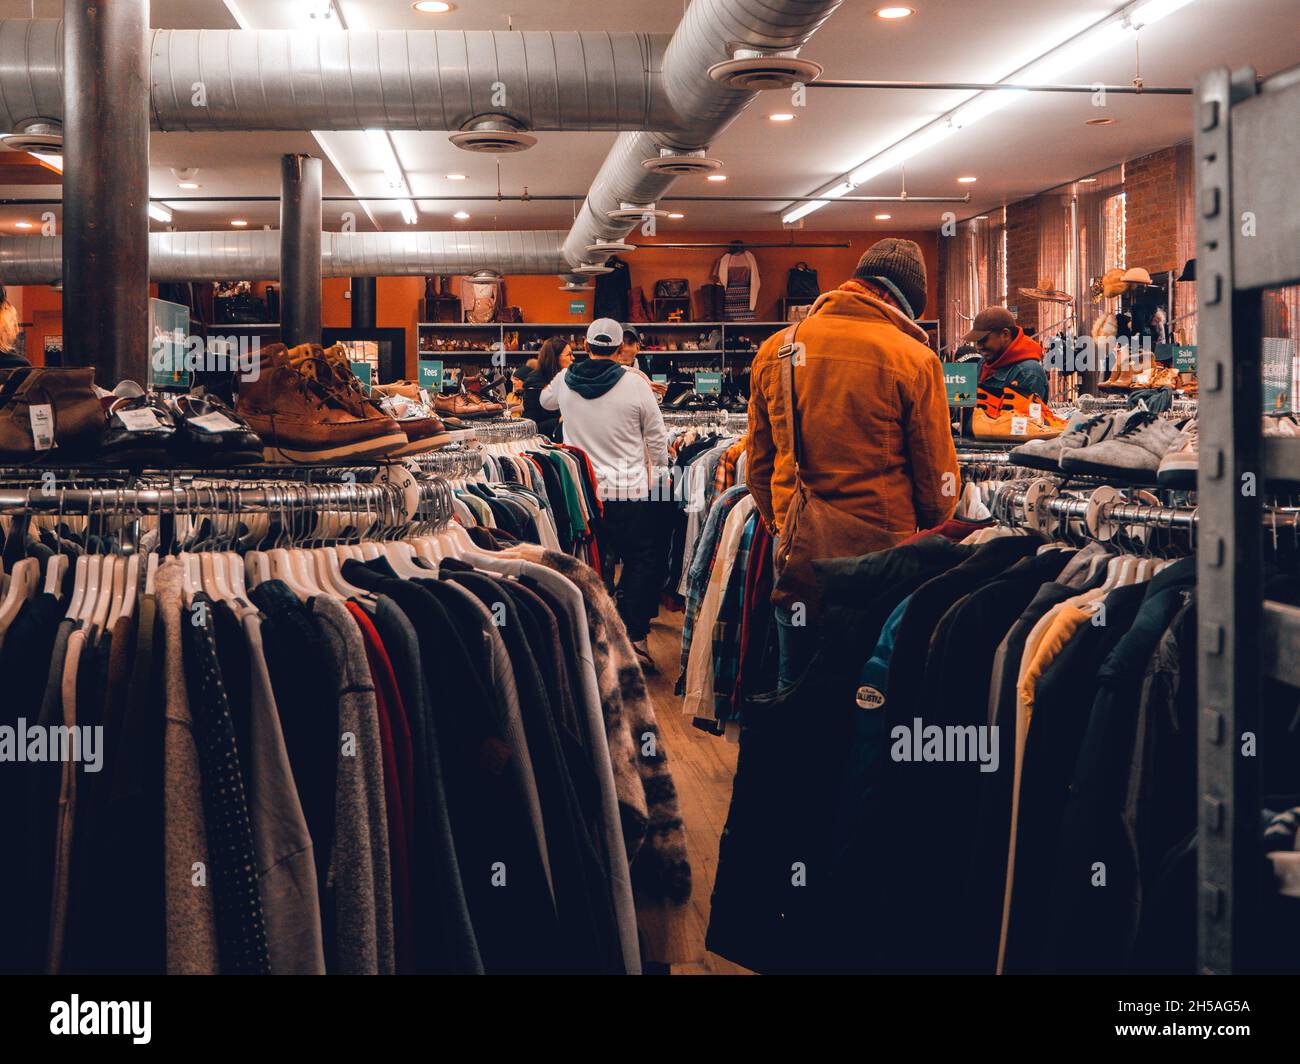 Inside a thrift shop for clothes Stock Photo